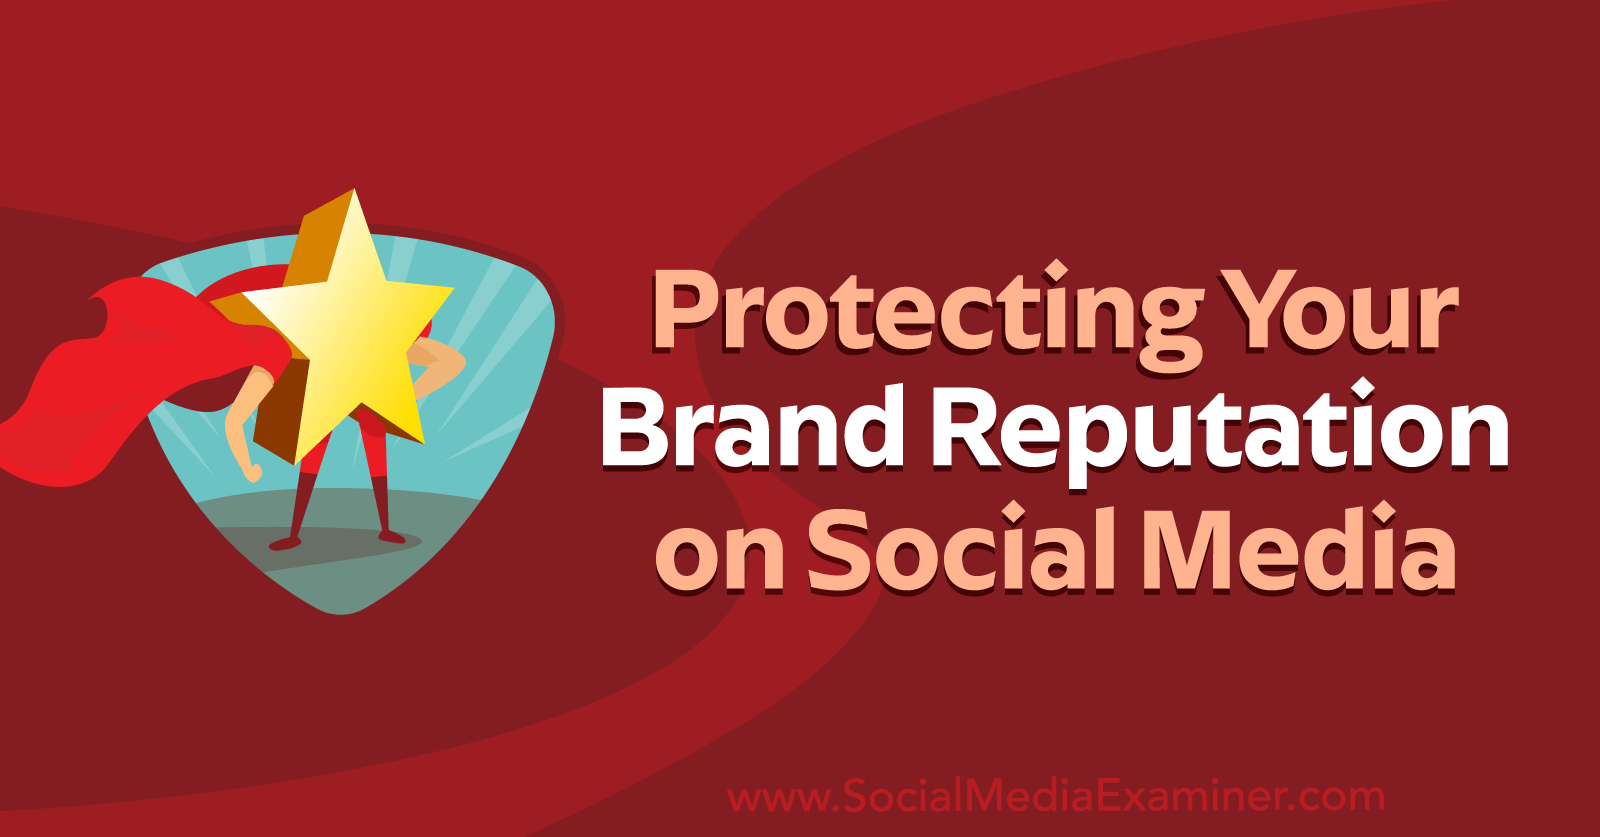 Protecting Your Brand Reputation on Social Media by Social Media Examiner